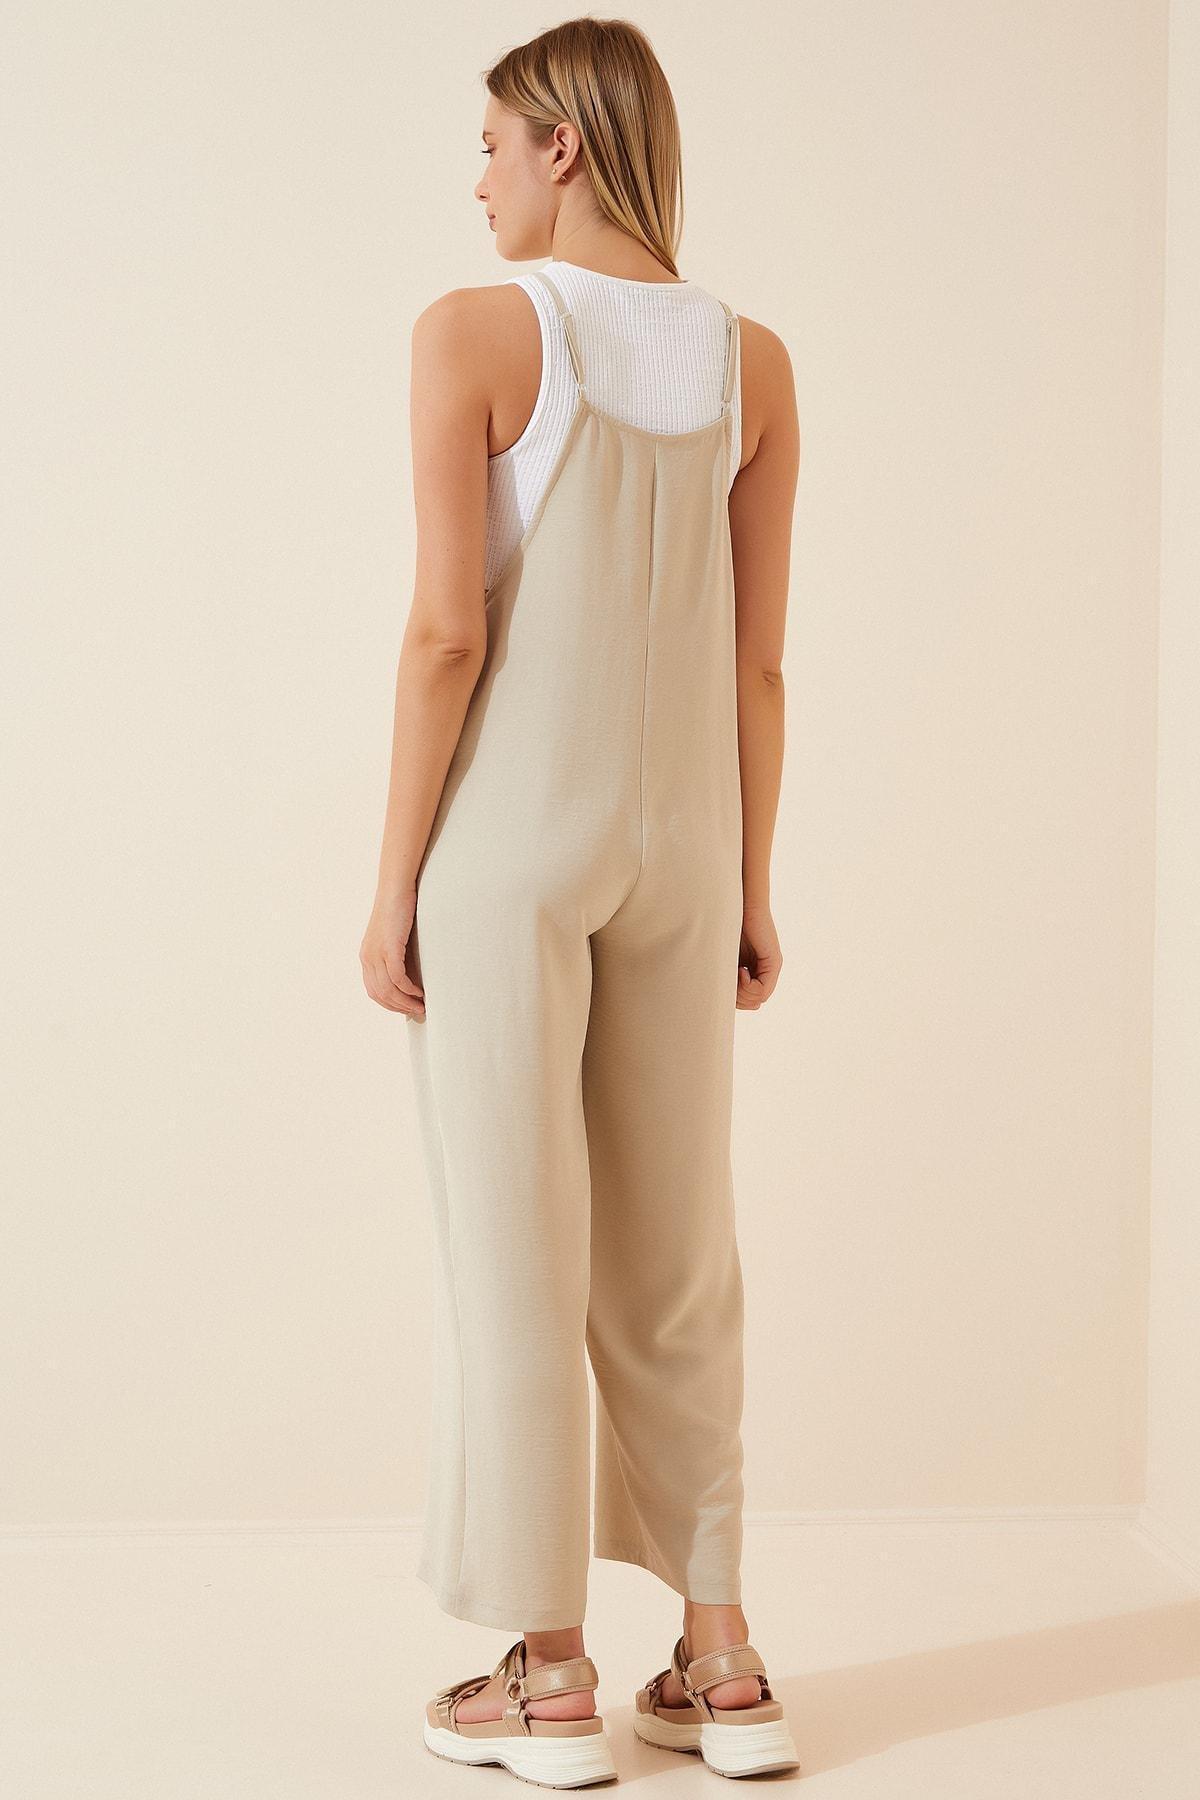 Happiness Istanbul - Beige Square Collar Jumpsuit